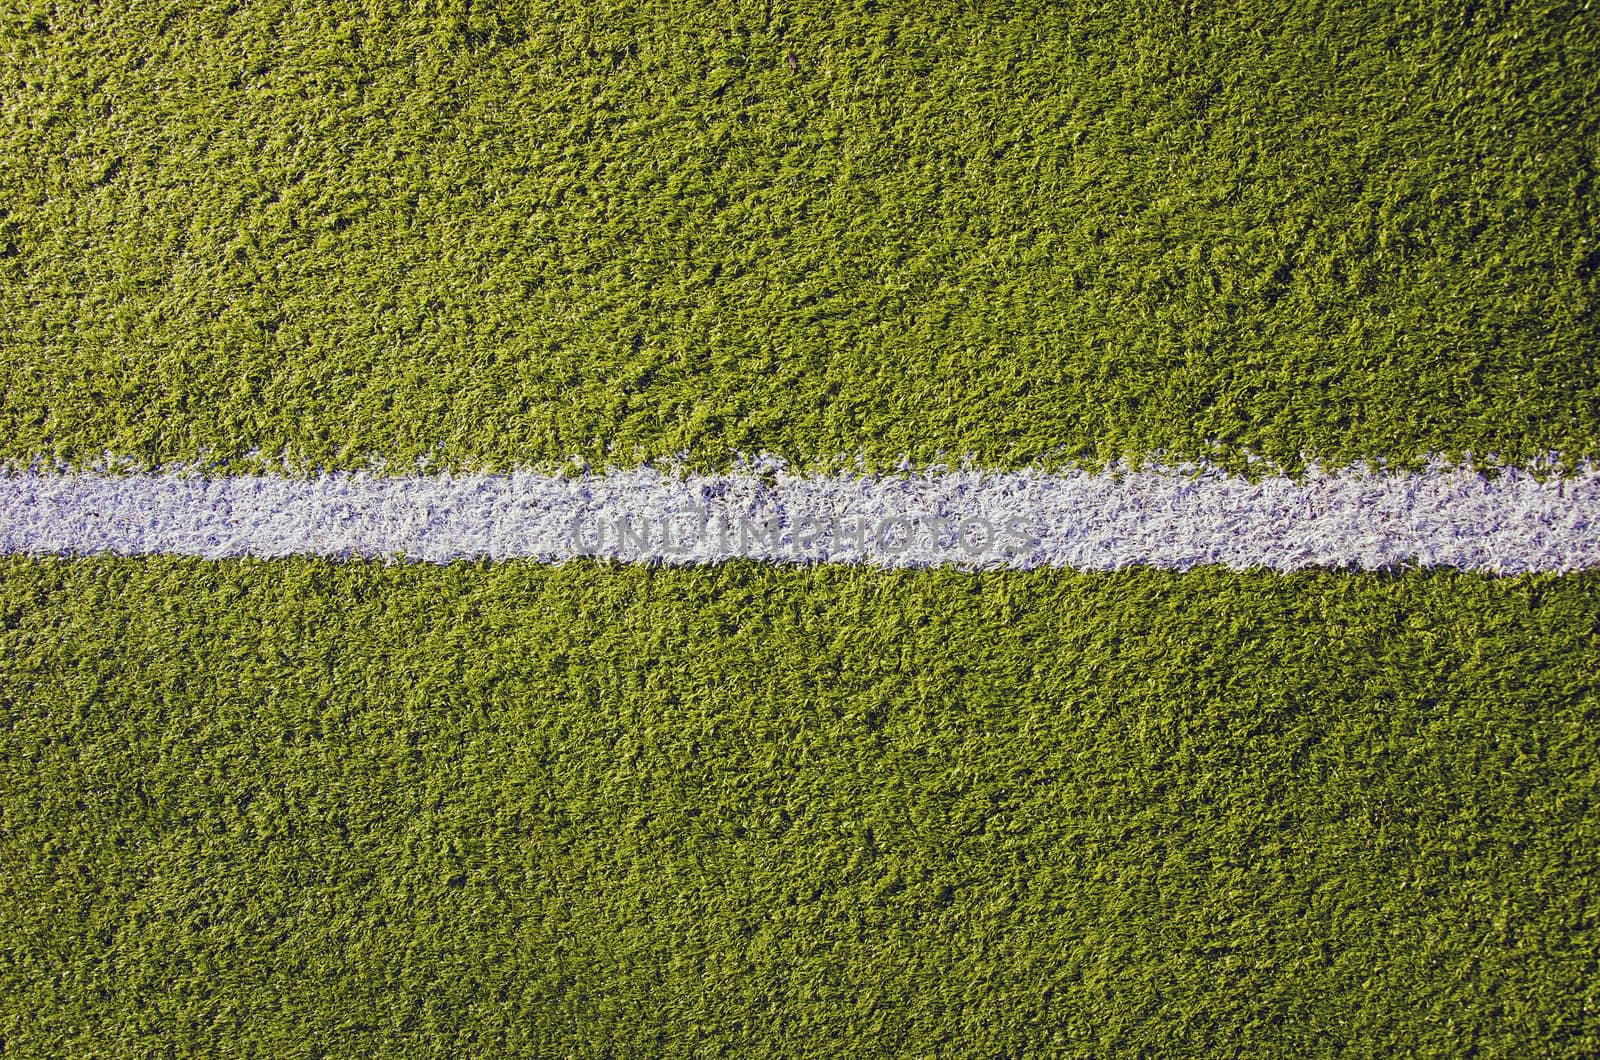 Synthetic sports pitches athletic green surface and white markings closeup background backdrop.